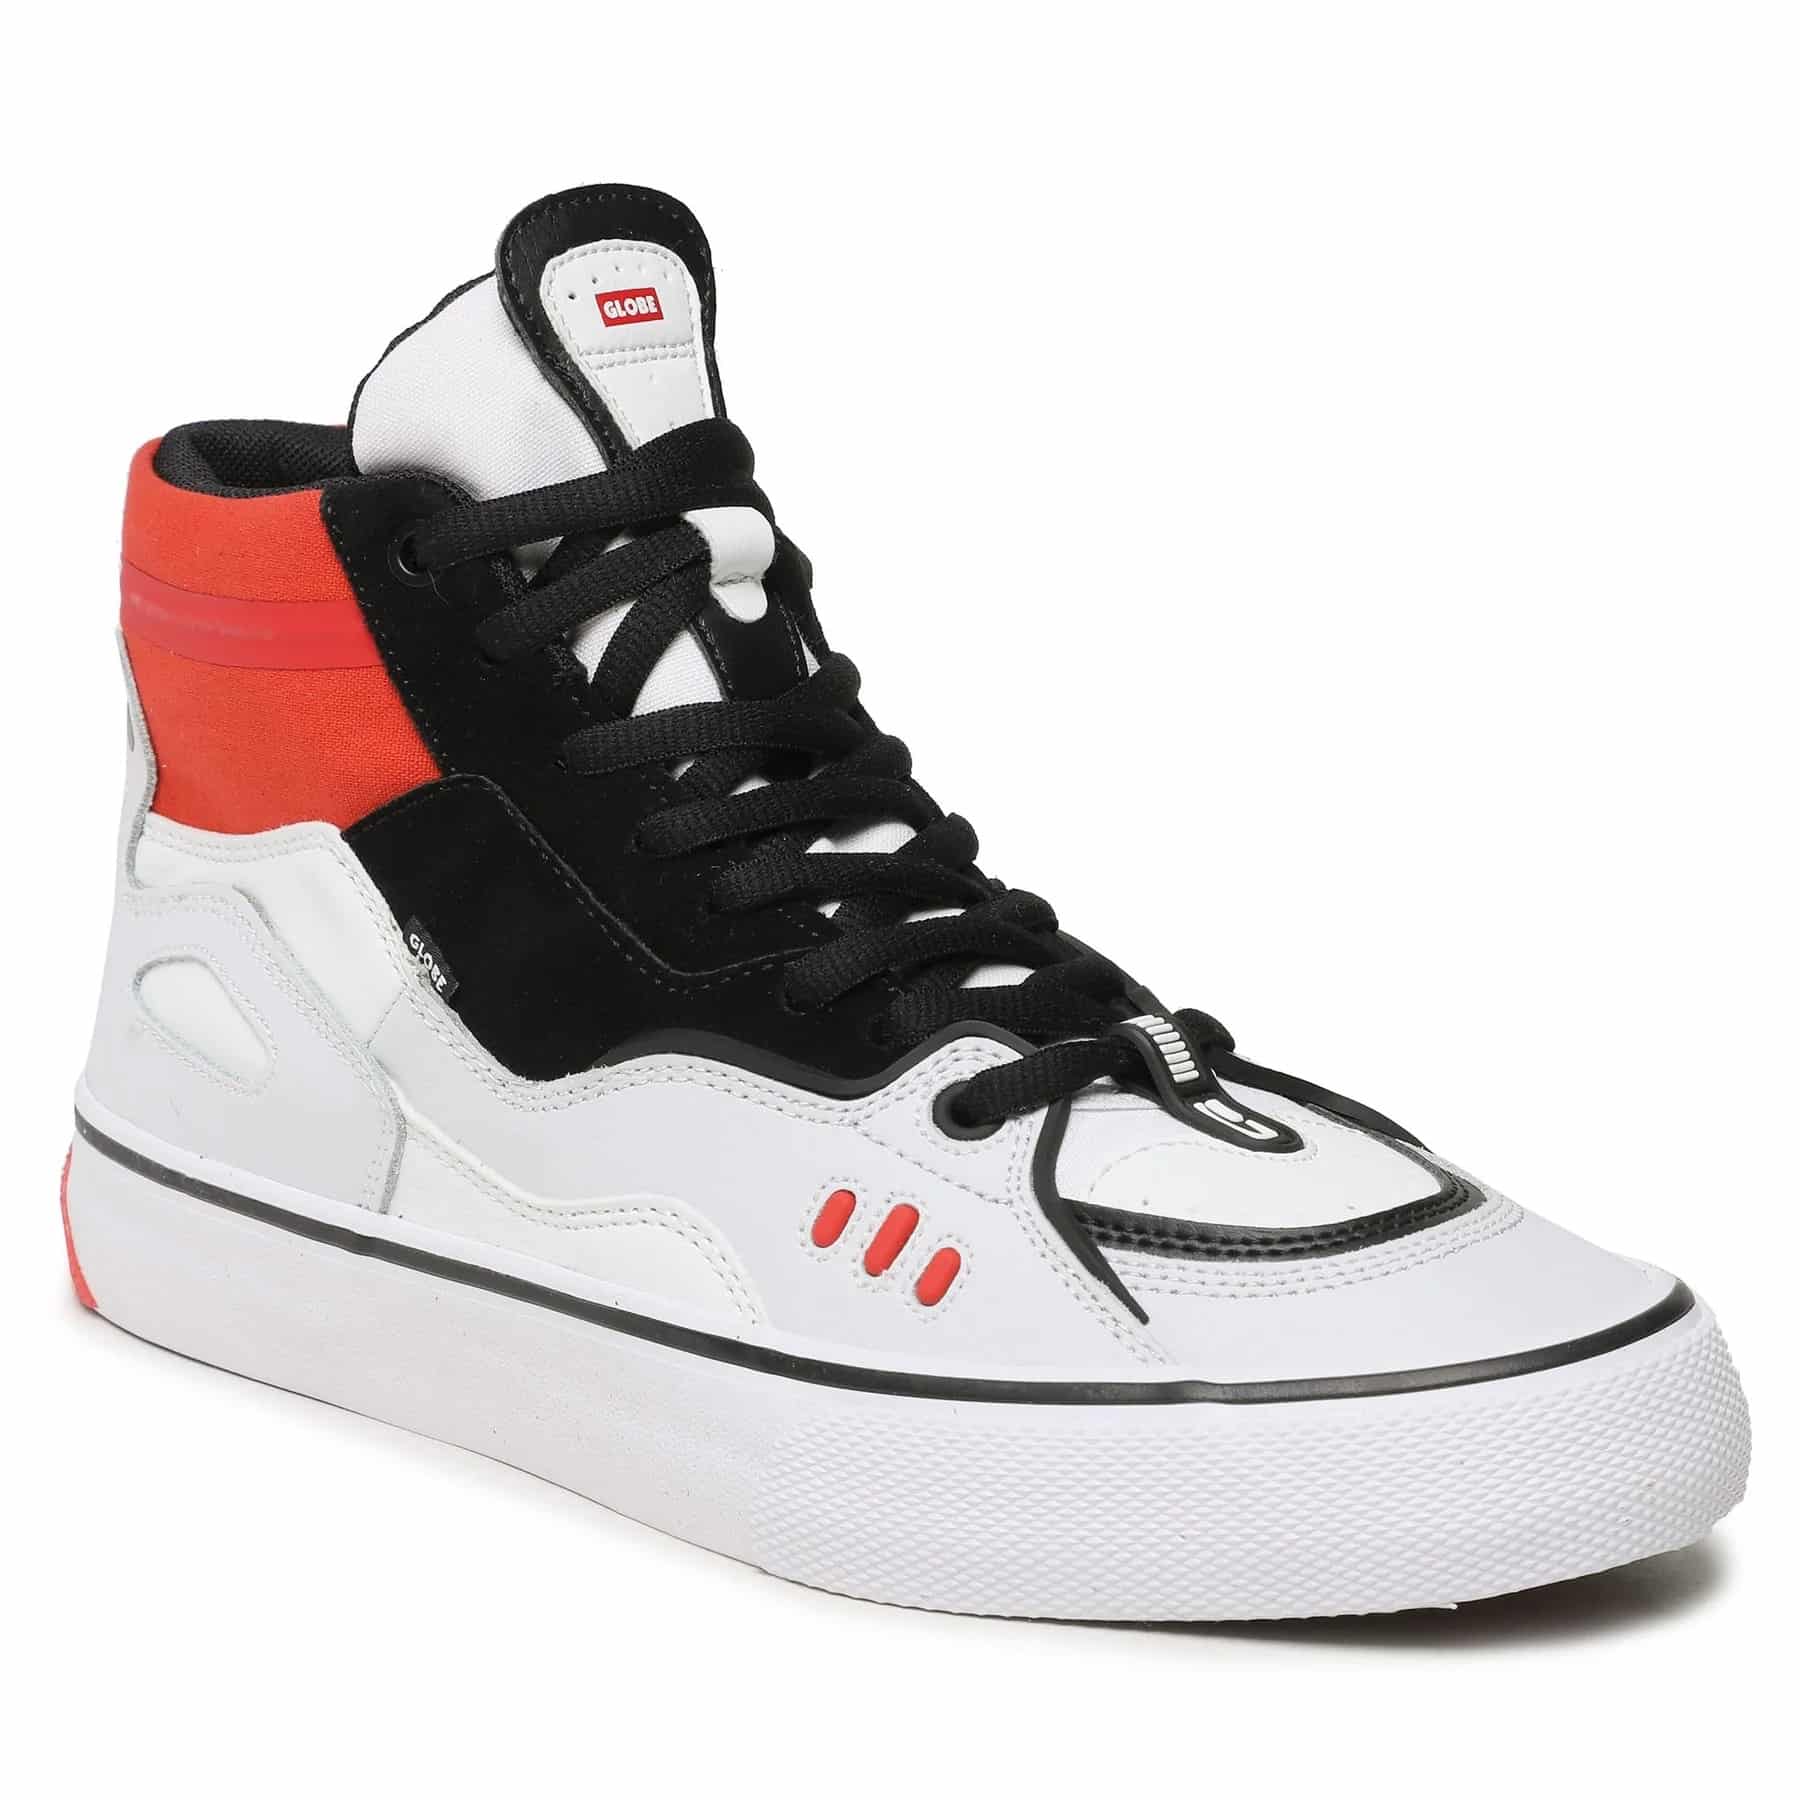 Globe Dimension Blanc White Black Red 11010 Chaussures Homme vue2